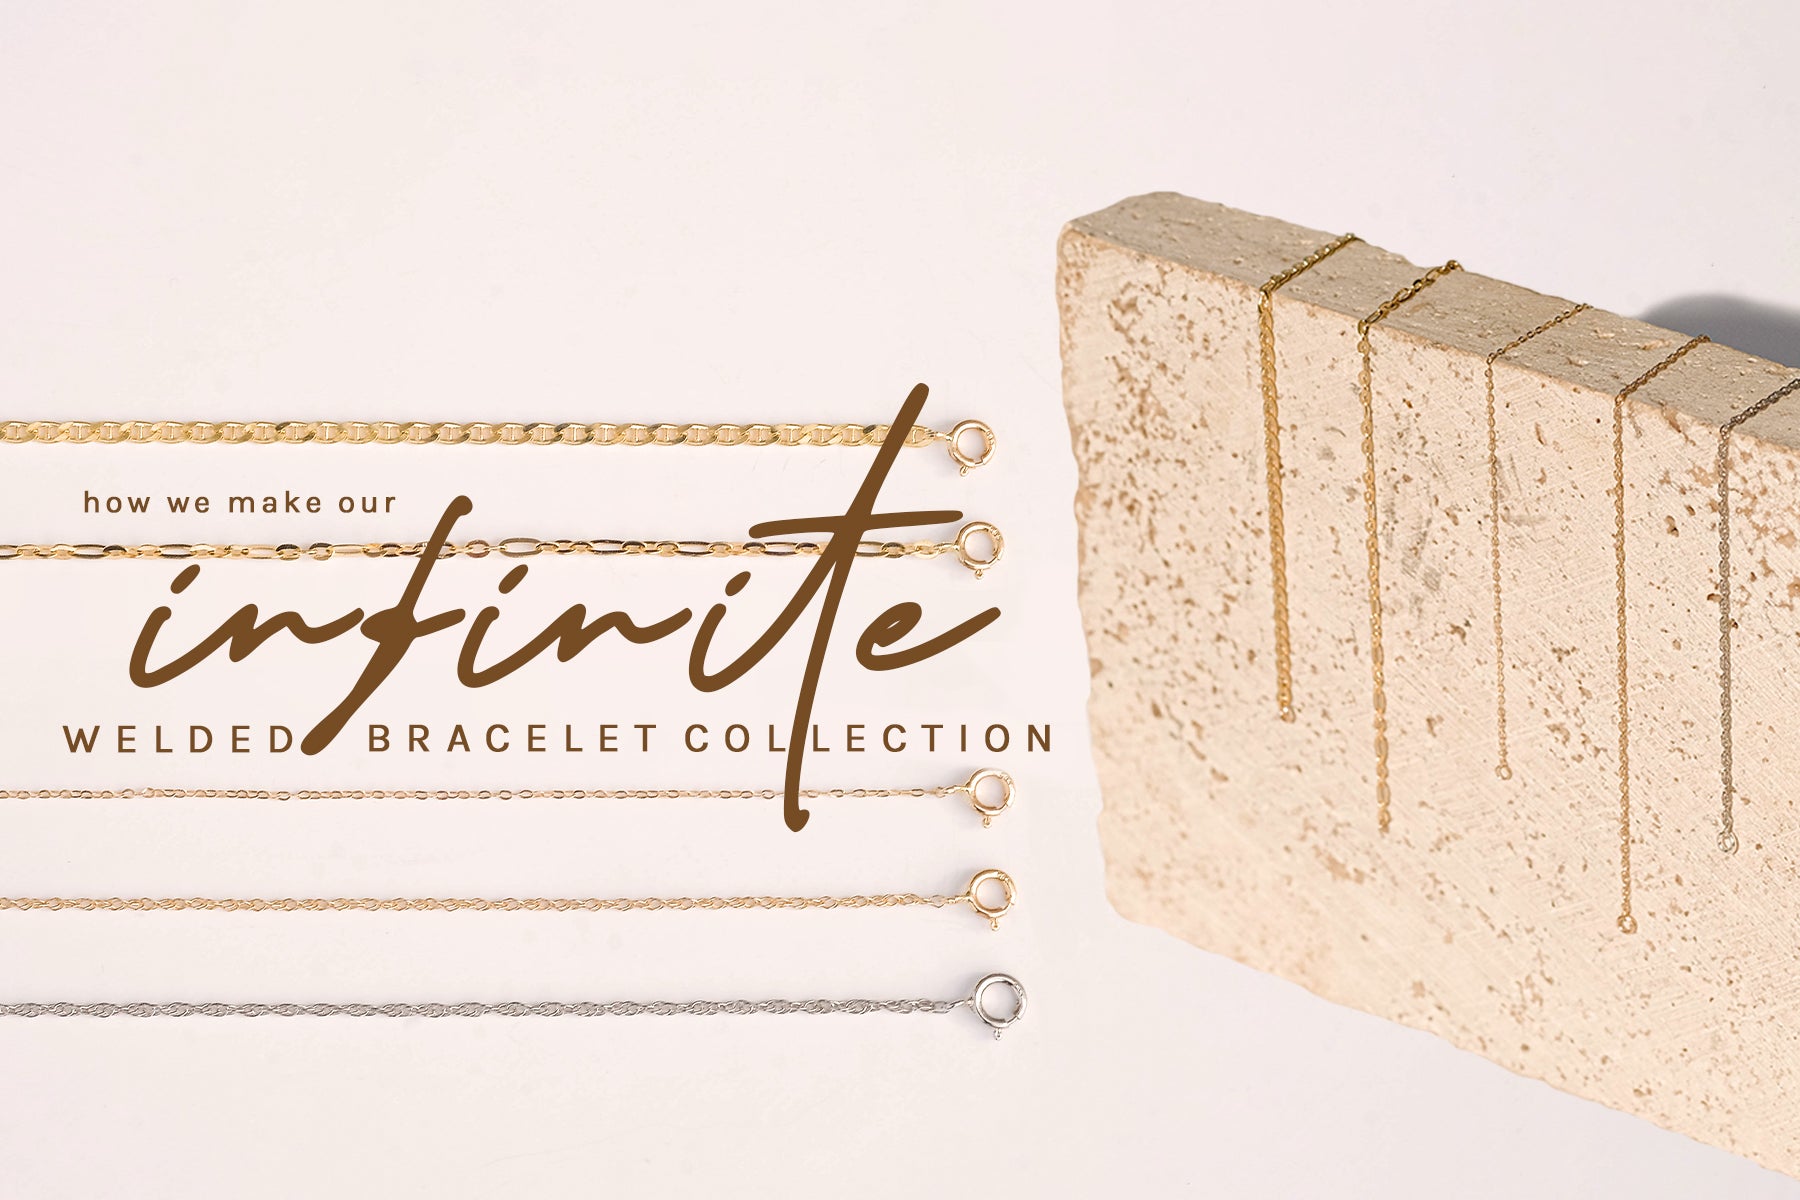 How we make our Infinite Welded Bracelet Collection